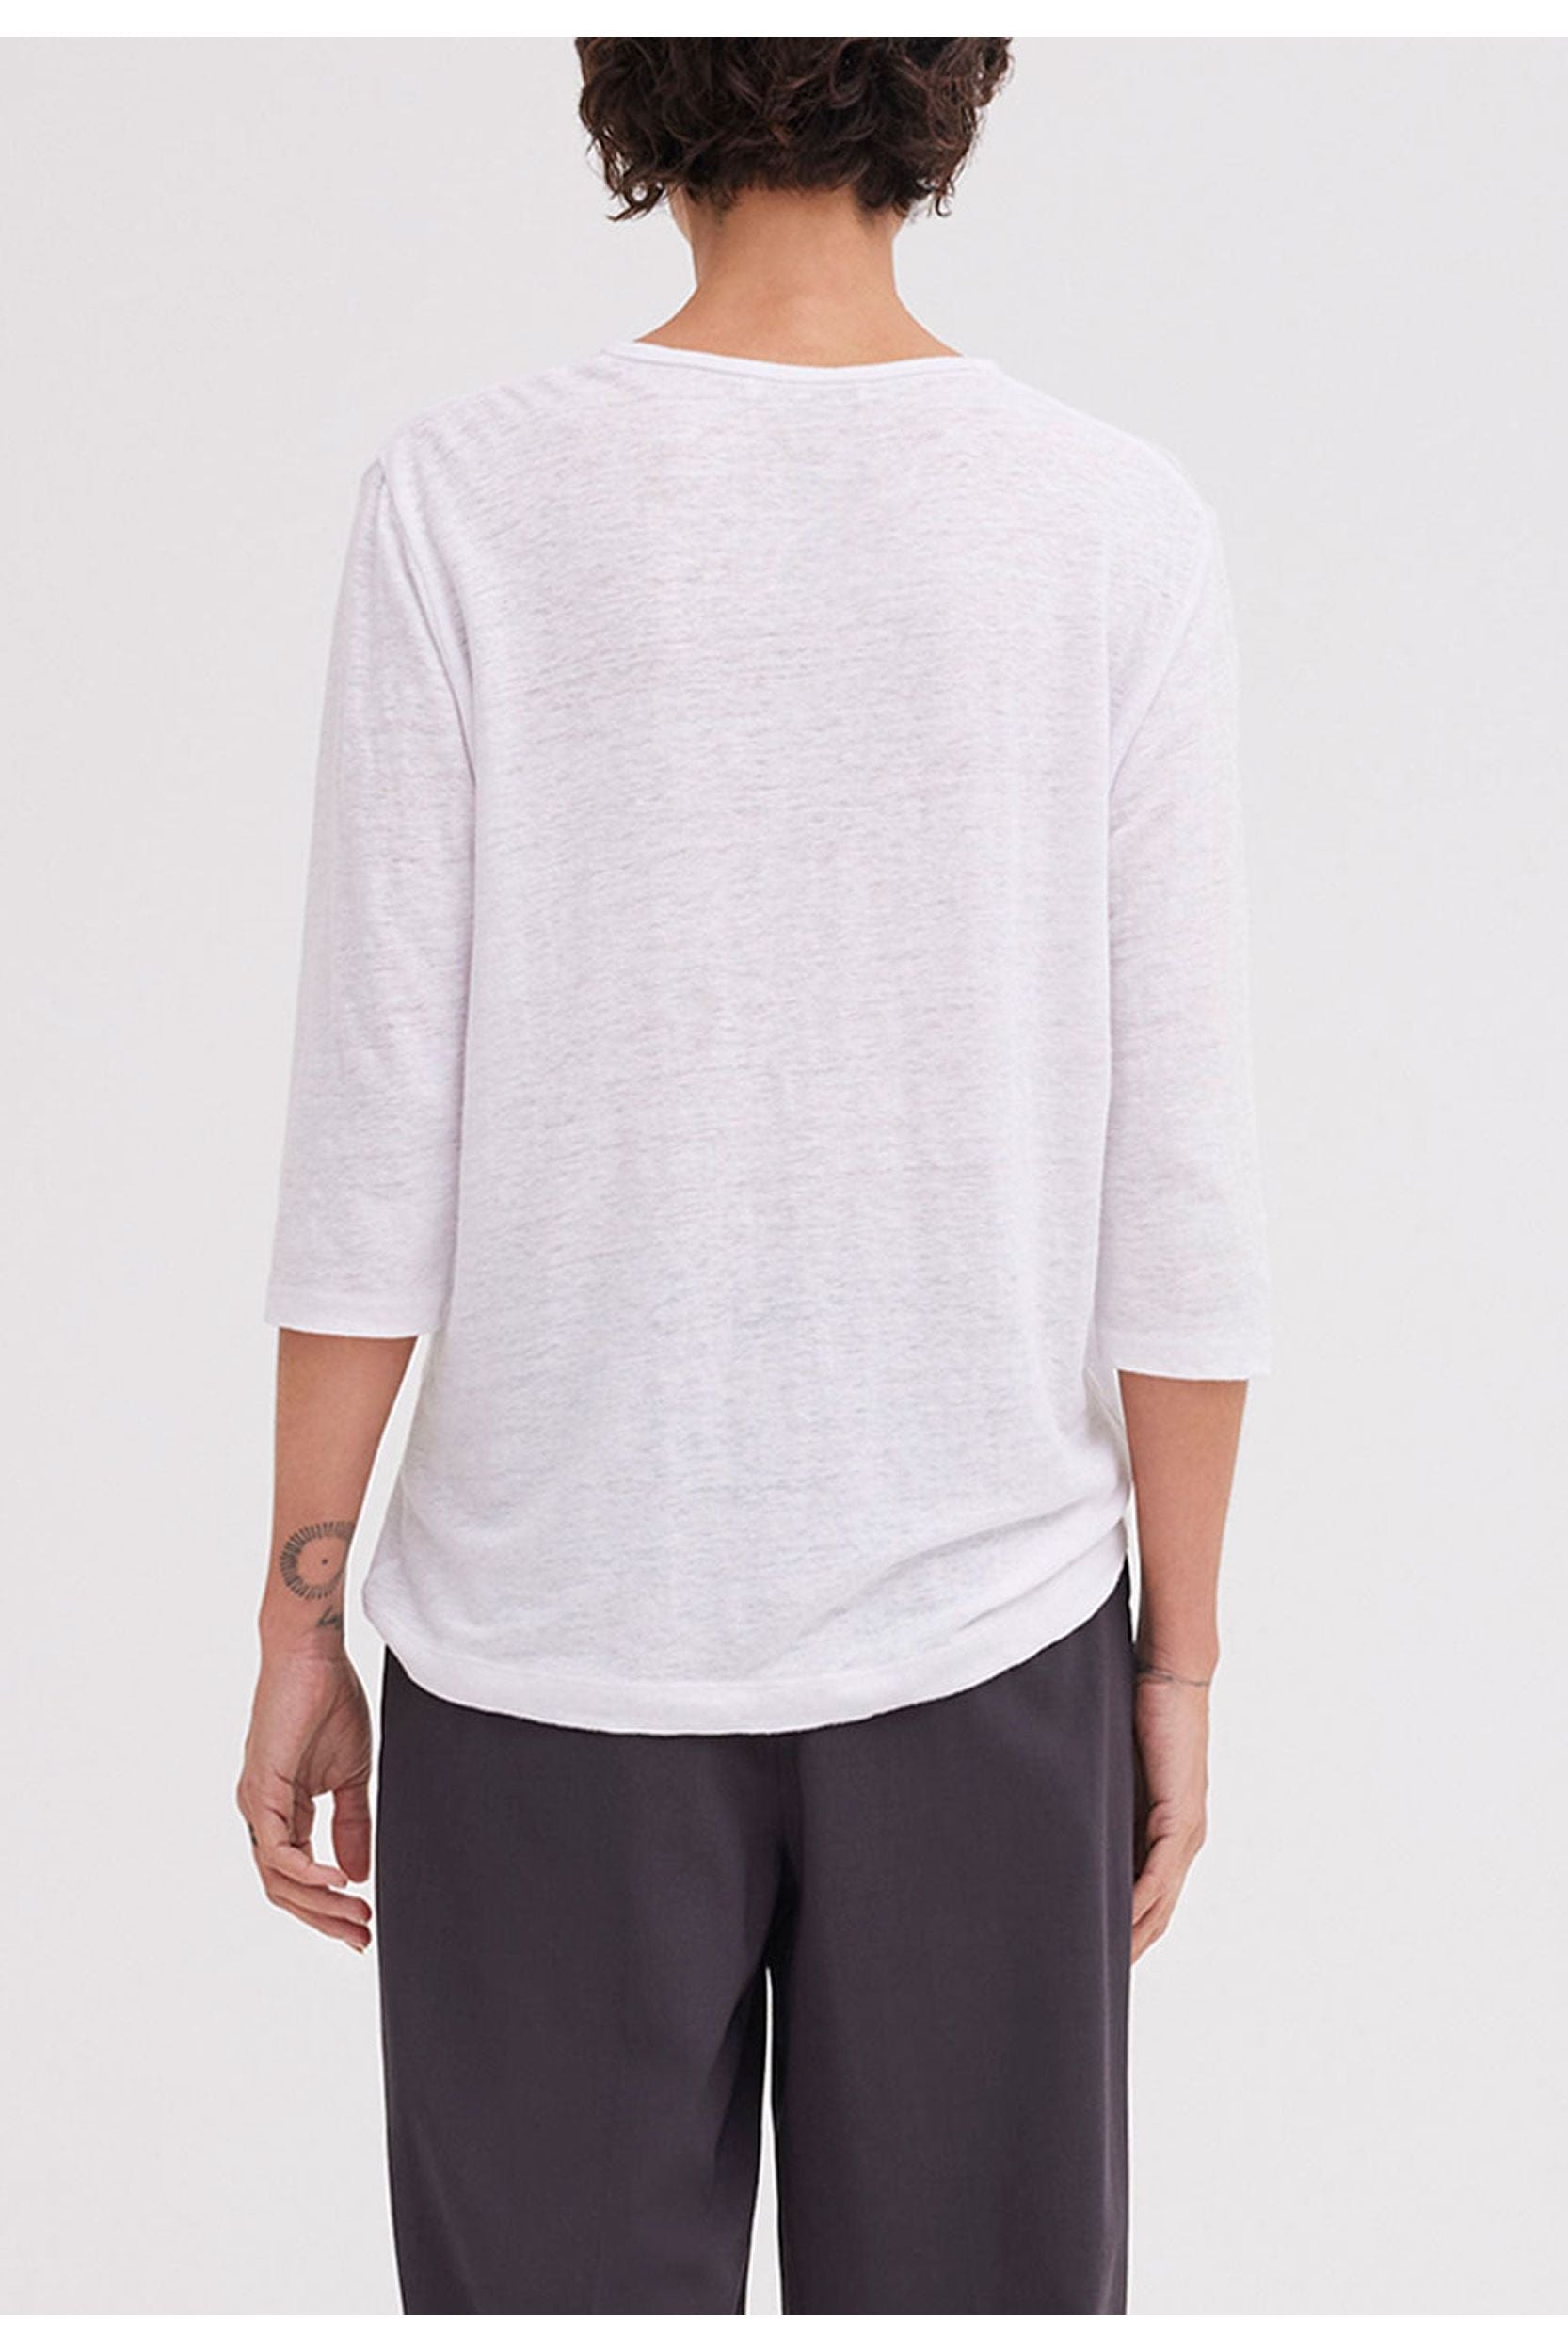 Max Tee in White by Jack + Jack